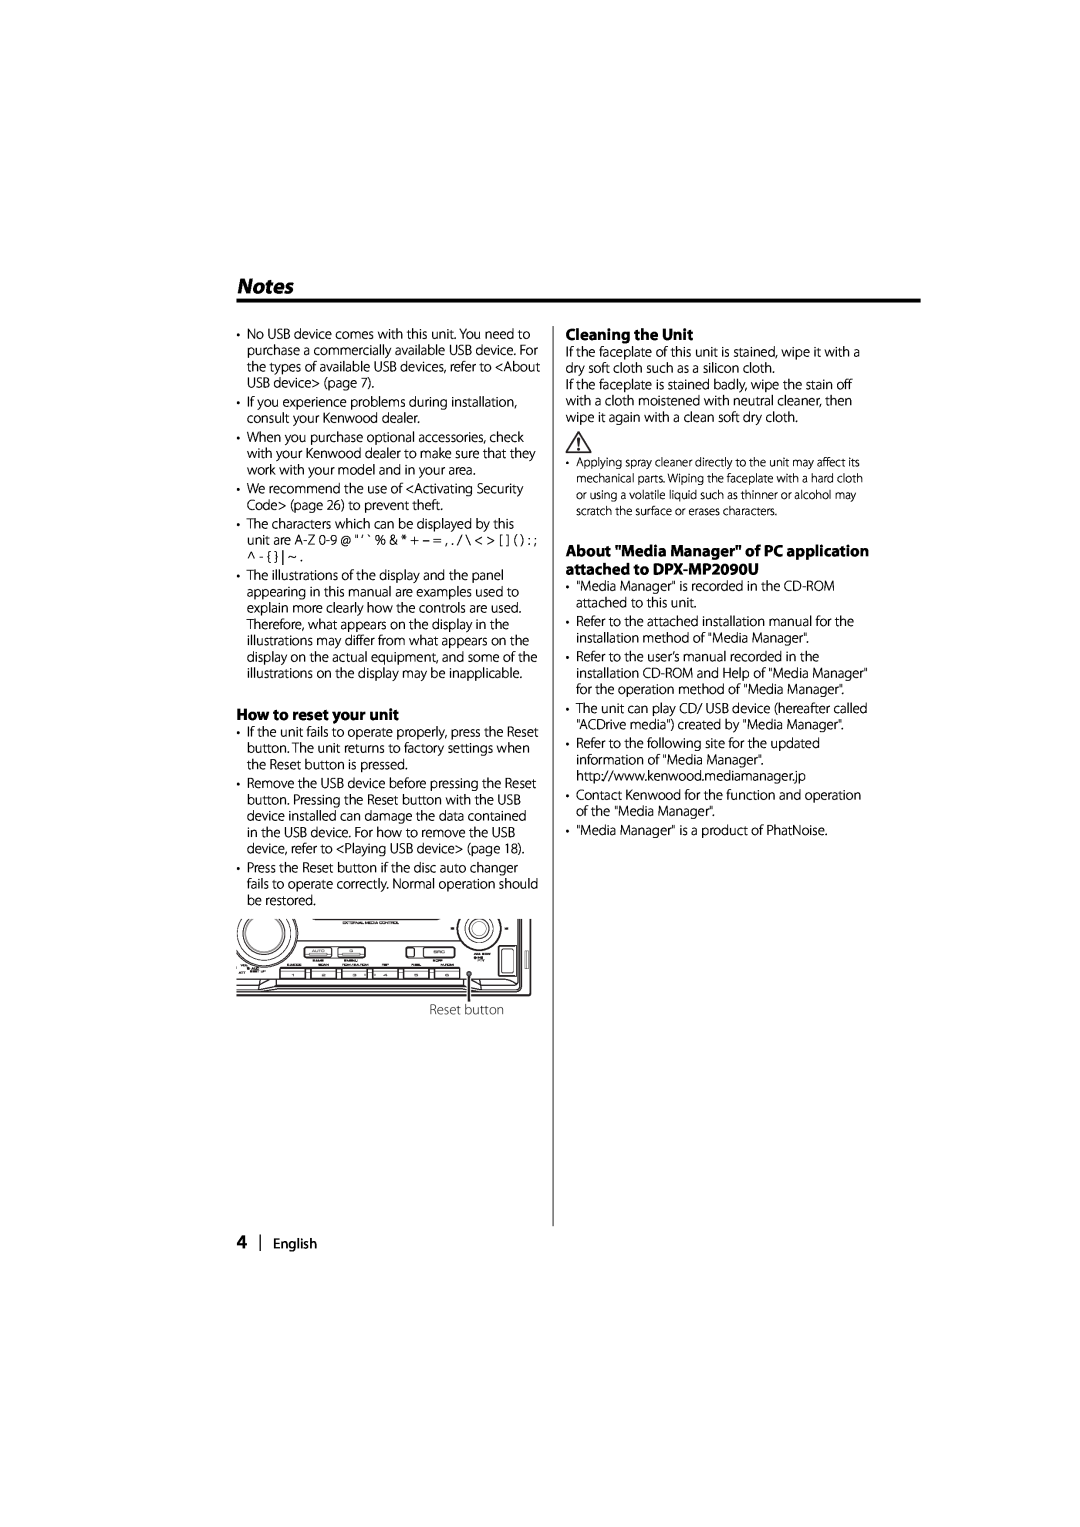 Kenwood DPX-MP2090U instruction manual How to reset your unit, Cleaning the Unit 